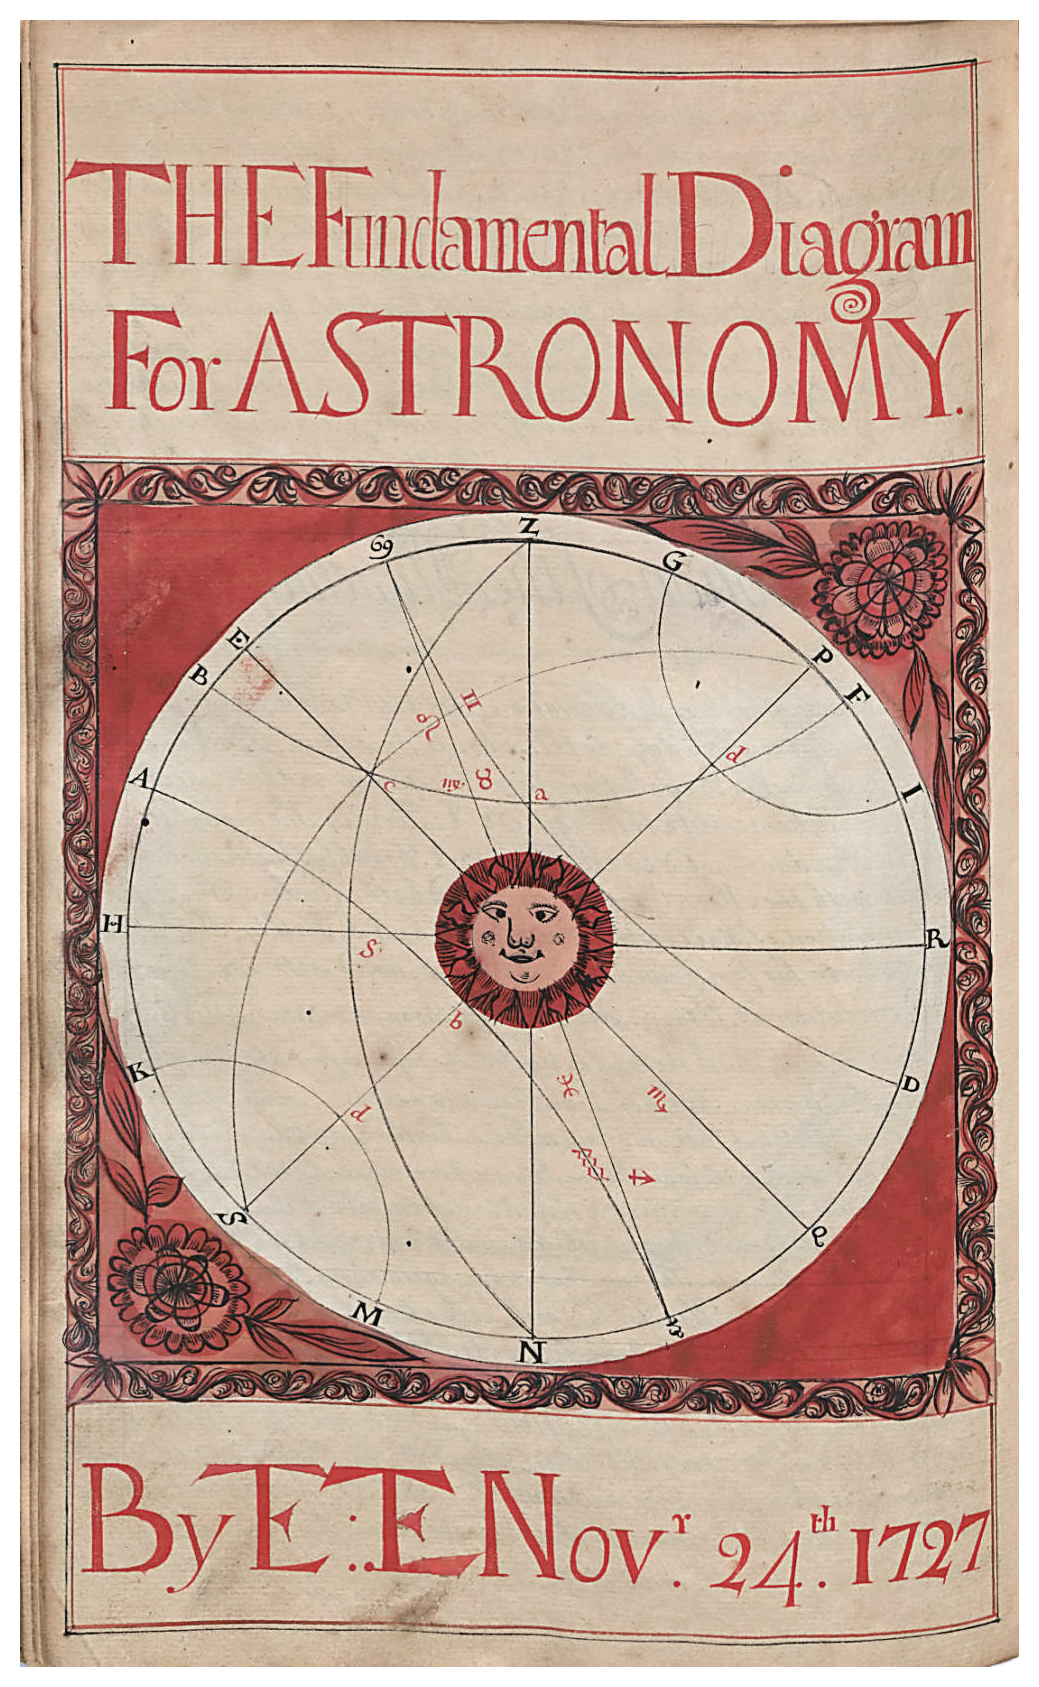 Thomas Earl, “The Fundamental Diagram for Astronomy,” from his 1727 copybook